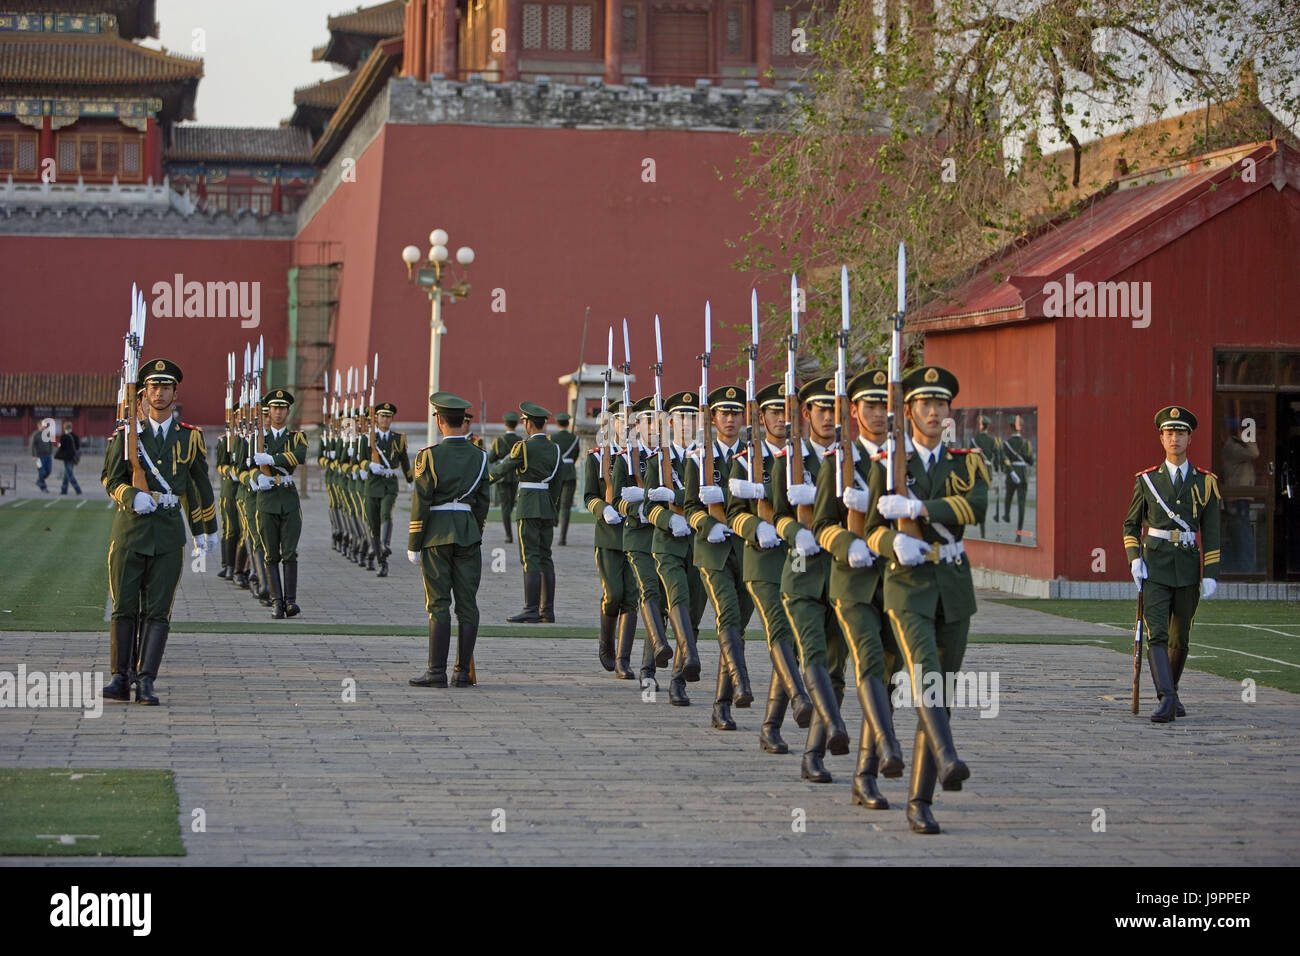 China,Peking,Forbidden City,imperial palace,soldier,drill,no model release,Asia,Eastern Asia,town,capital,part of town,destination,palace,palace museum,building,structure,palace building,architecture,place of interest,culture,tourism,UNESCO-world cultural heritage,architecture,person,guards,awake soldiers, Stock Photo